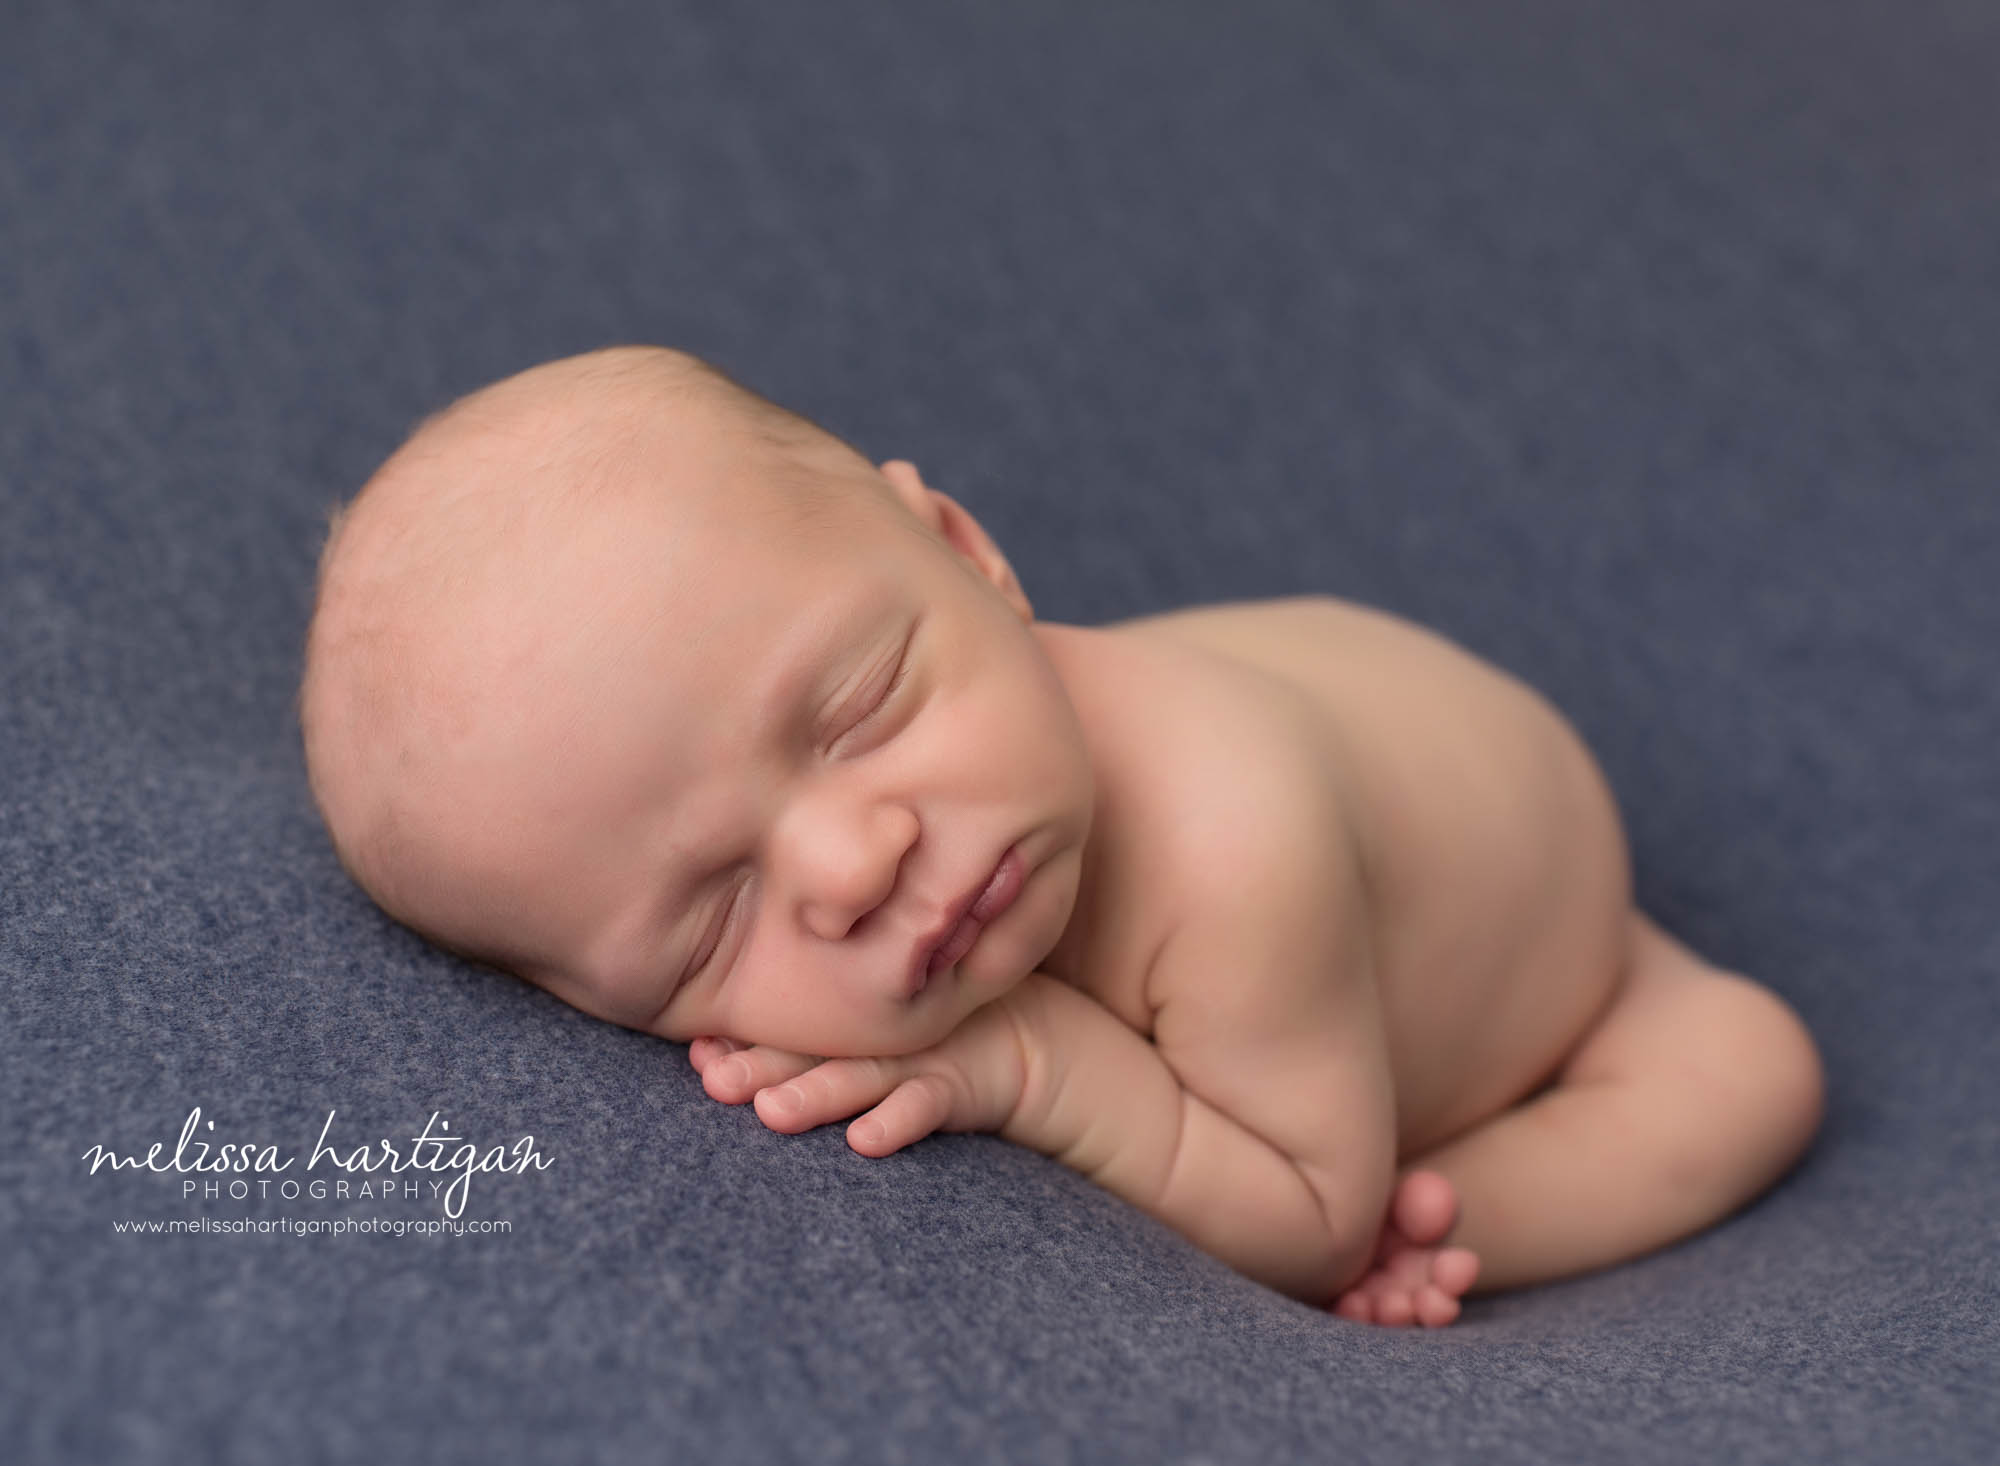 sleeping baby boy posed on blue backdrop with hand under cheek